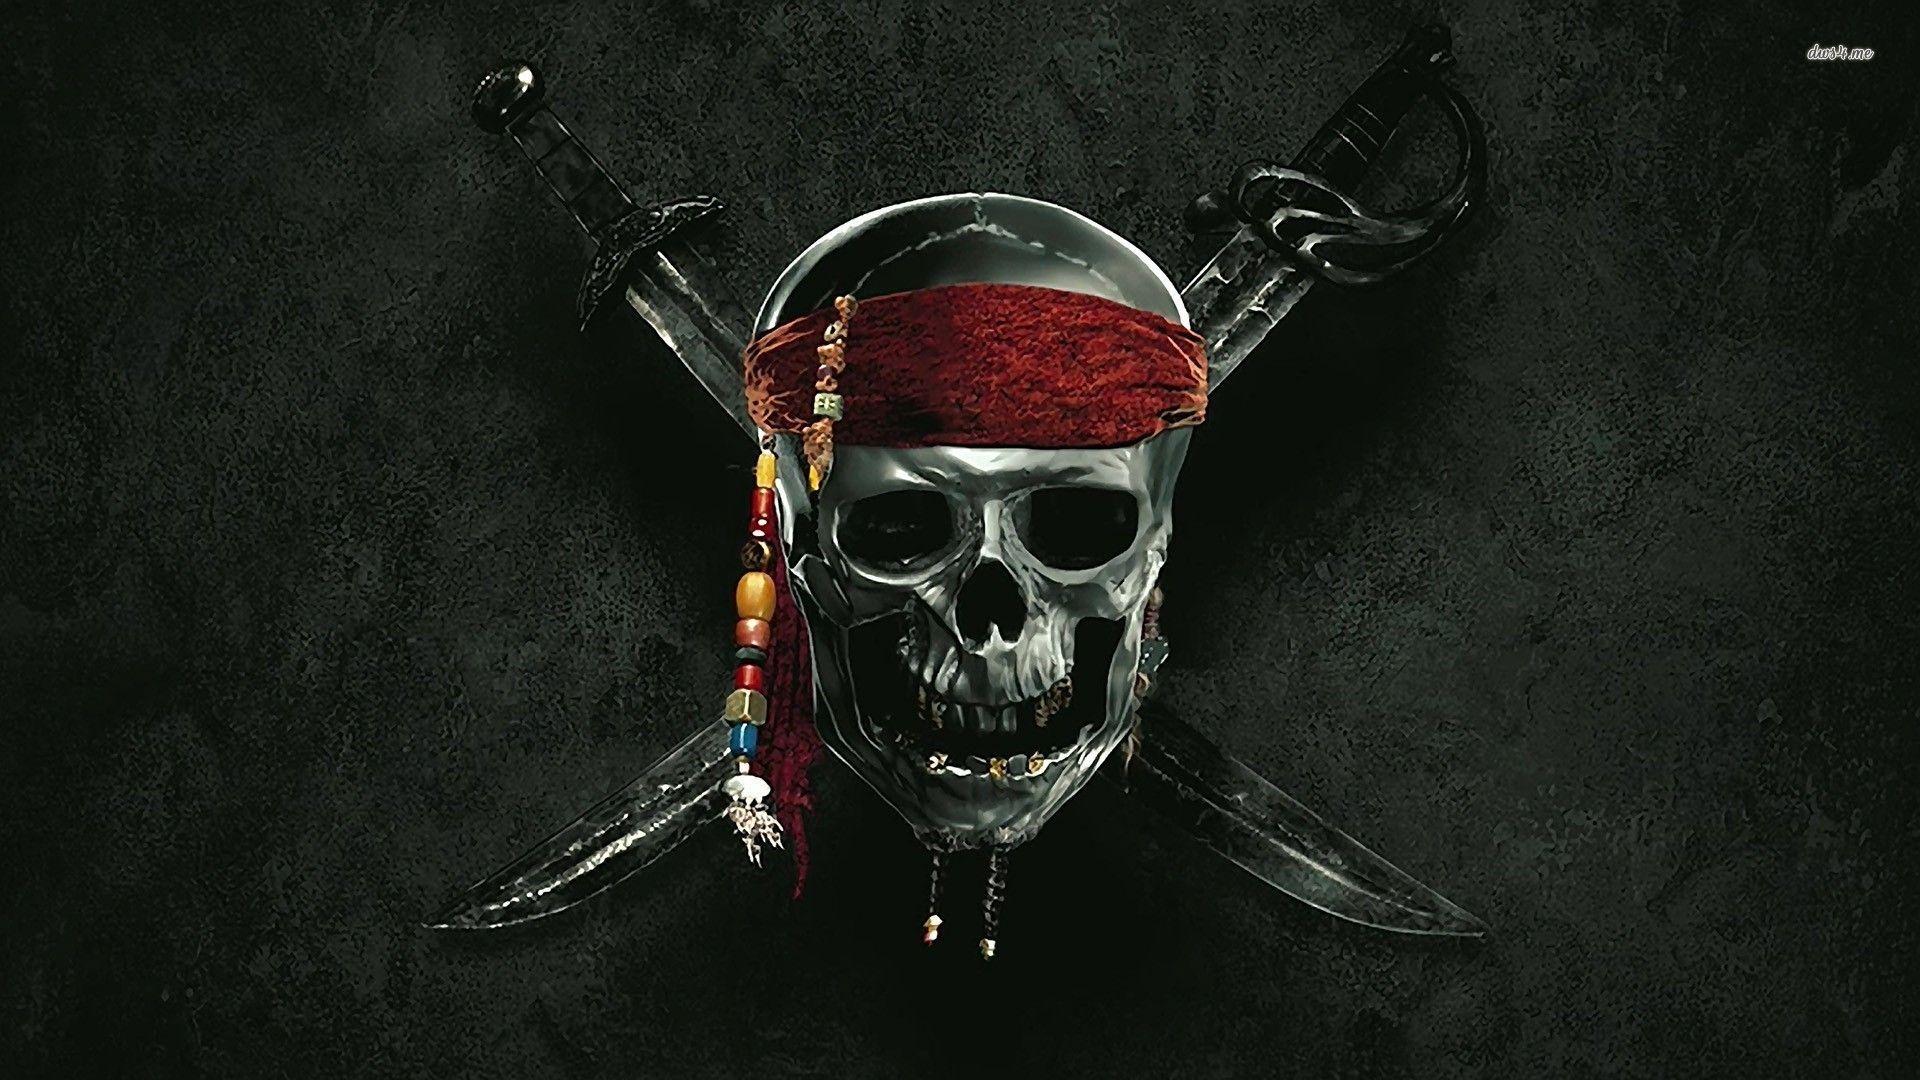 Pirates of the Caribbean downloading